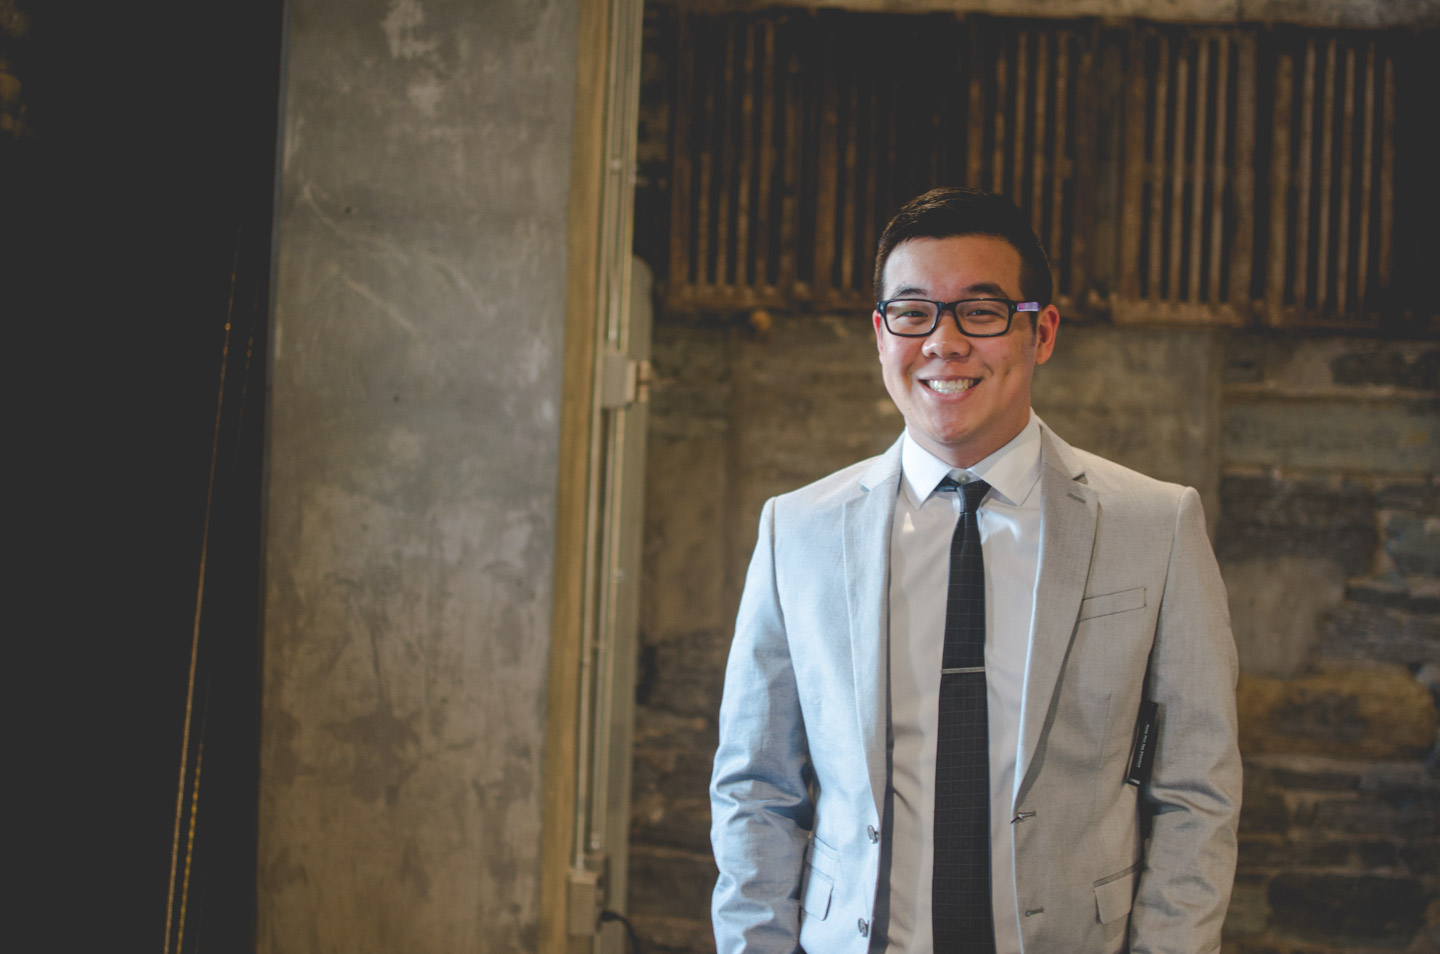 Undergraduate Brian Ung is preparing to be a leader for others in his shoes